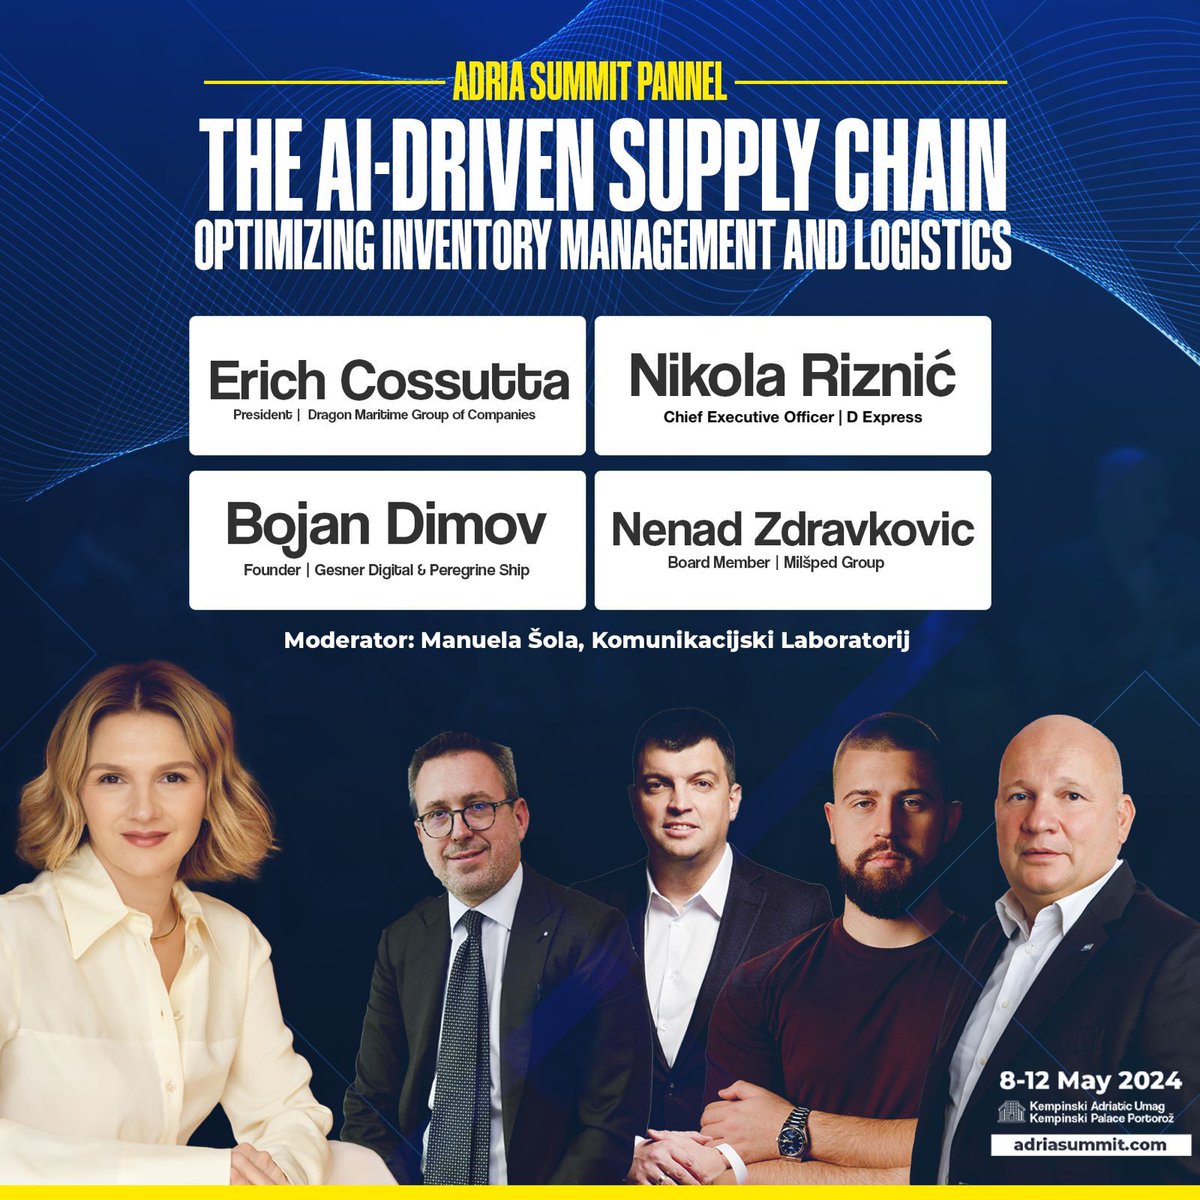 🌟 Join us at #AdriaSummit pannel 'The AI-Driven Supply Chain: Optimizing Inventory Management and Logistics.' 

Get ready to unlock the potential of AI in supply chain management! 📷 #AISupplyChain #InventoryManagement #LogisticsOptimization